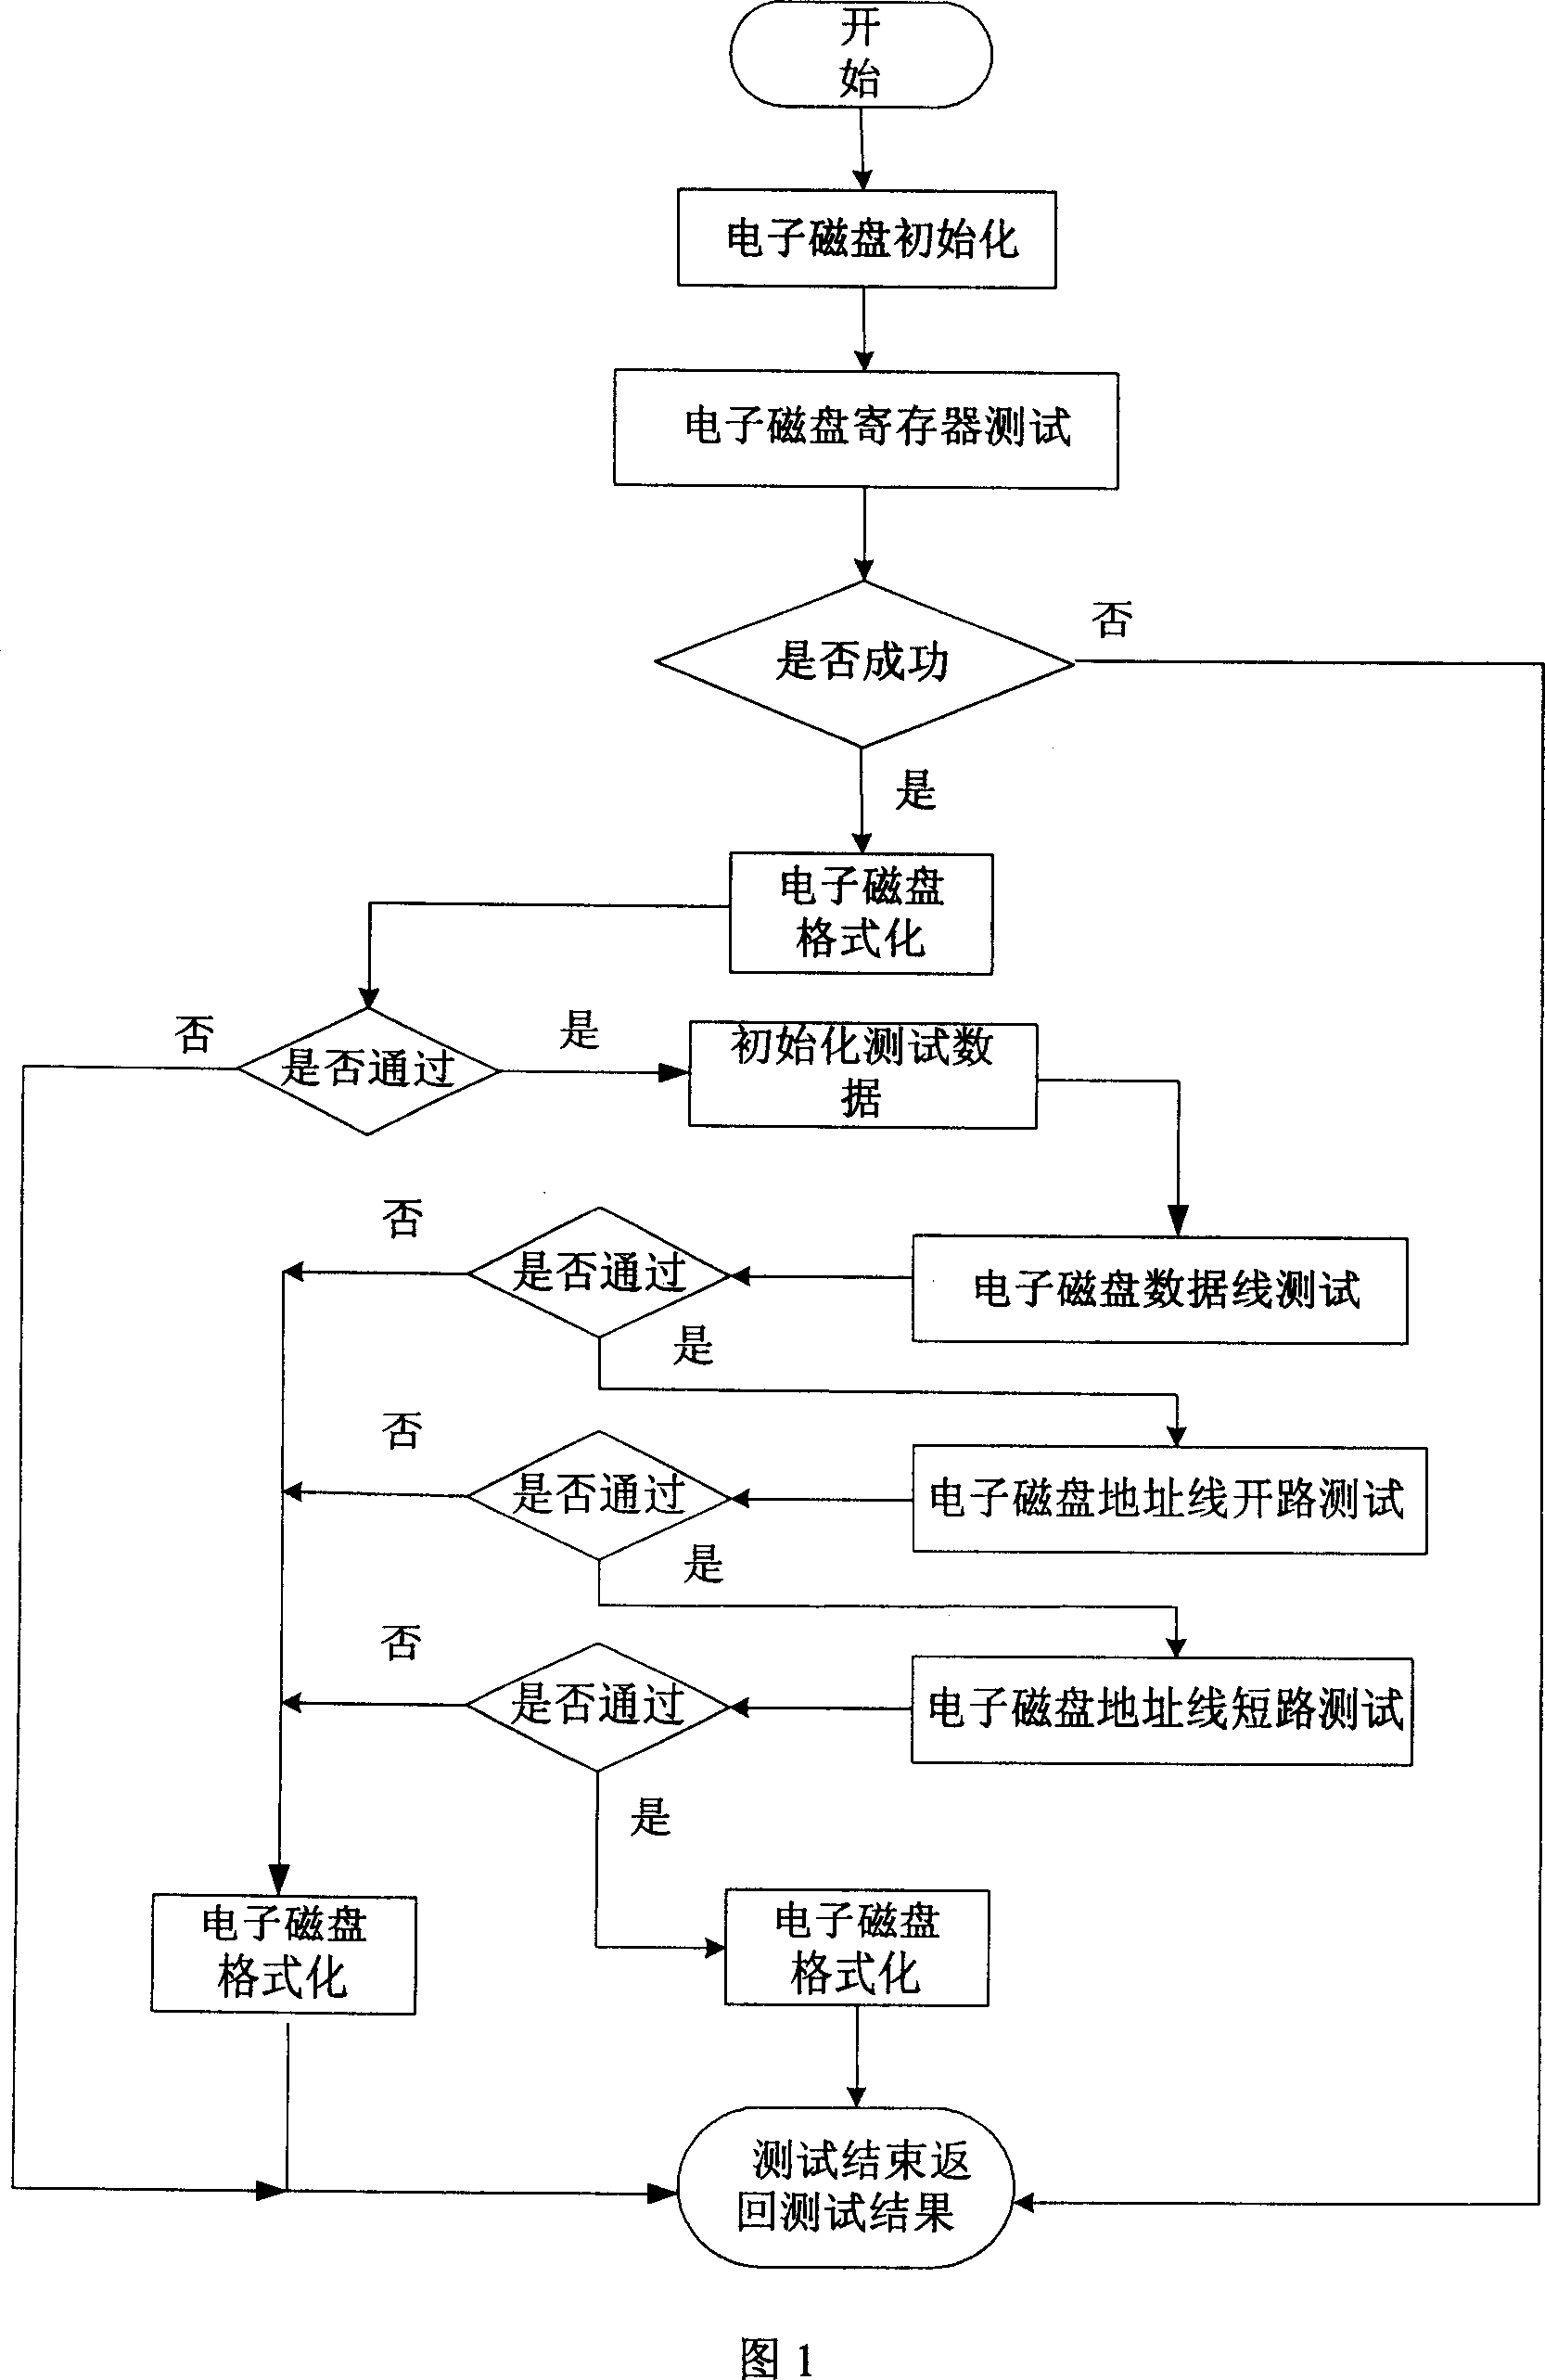 Method for detecting electronic magnetic disc